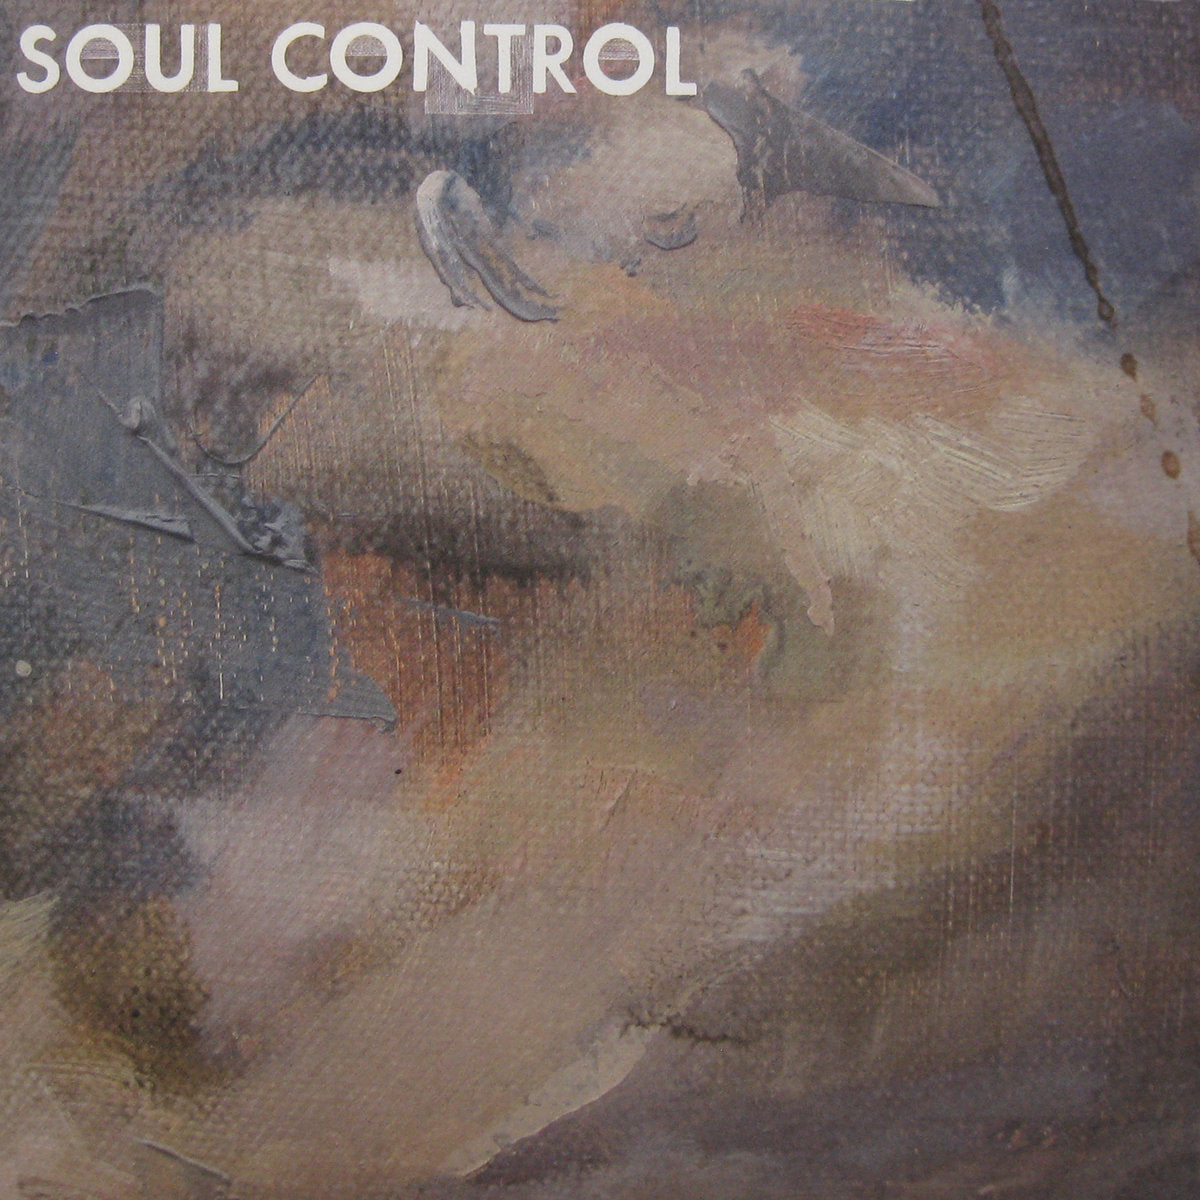 SOUL CONTROL 'Silent Reality' 7" / COLORED EDITION